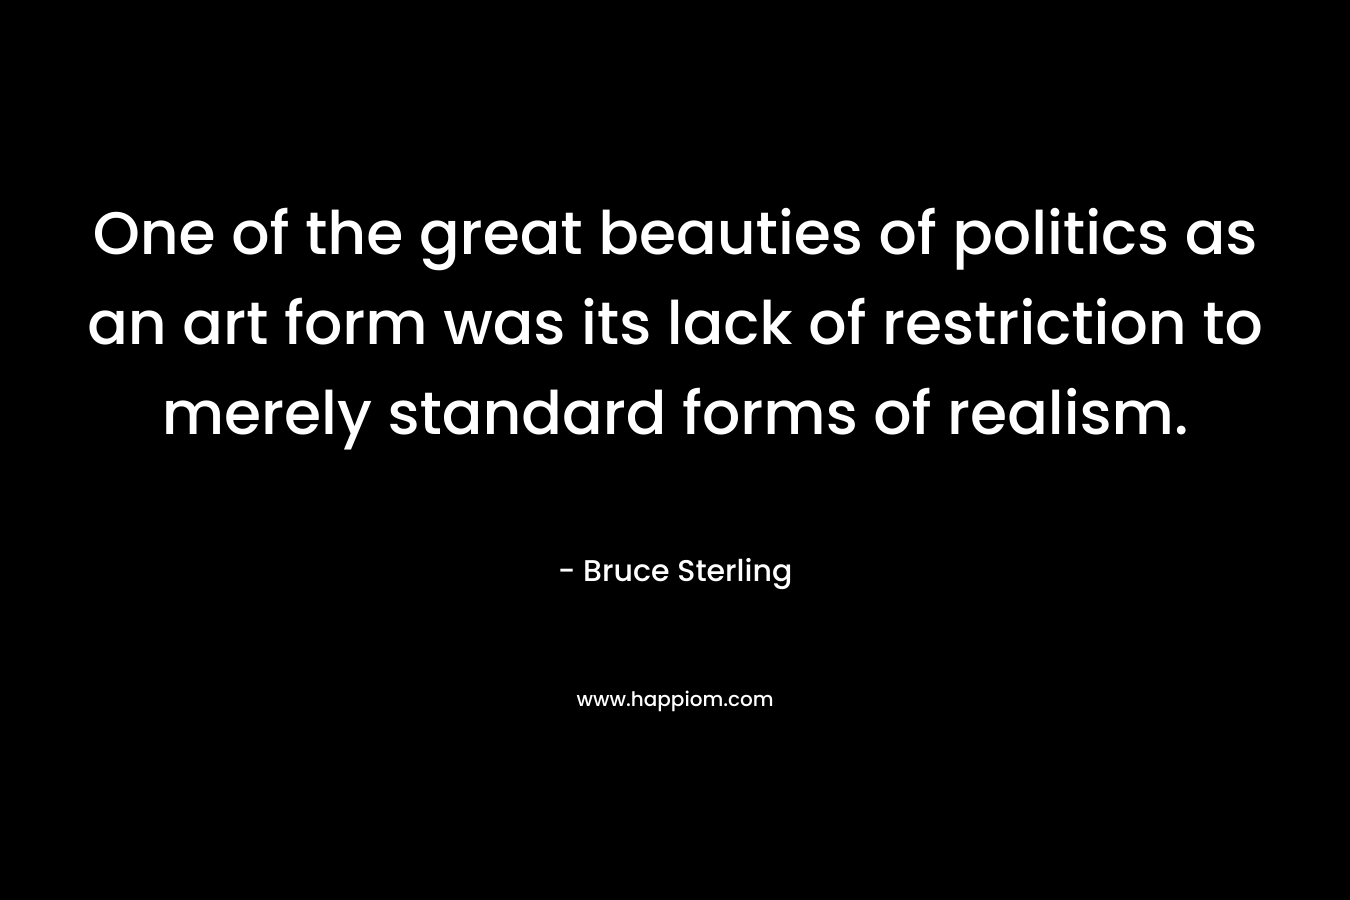 One of the great beauties of politics as an art form was its lack of restriction to merely standard forms of realism. – Bruce Sterling